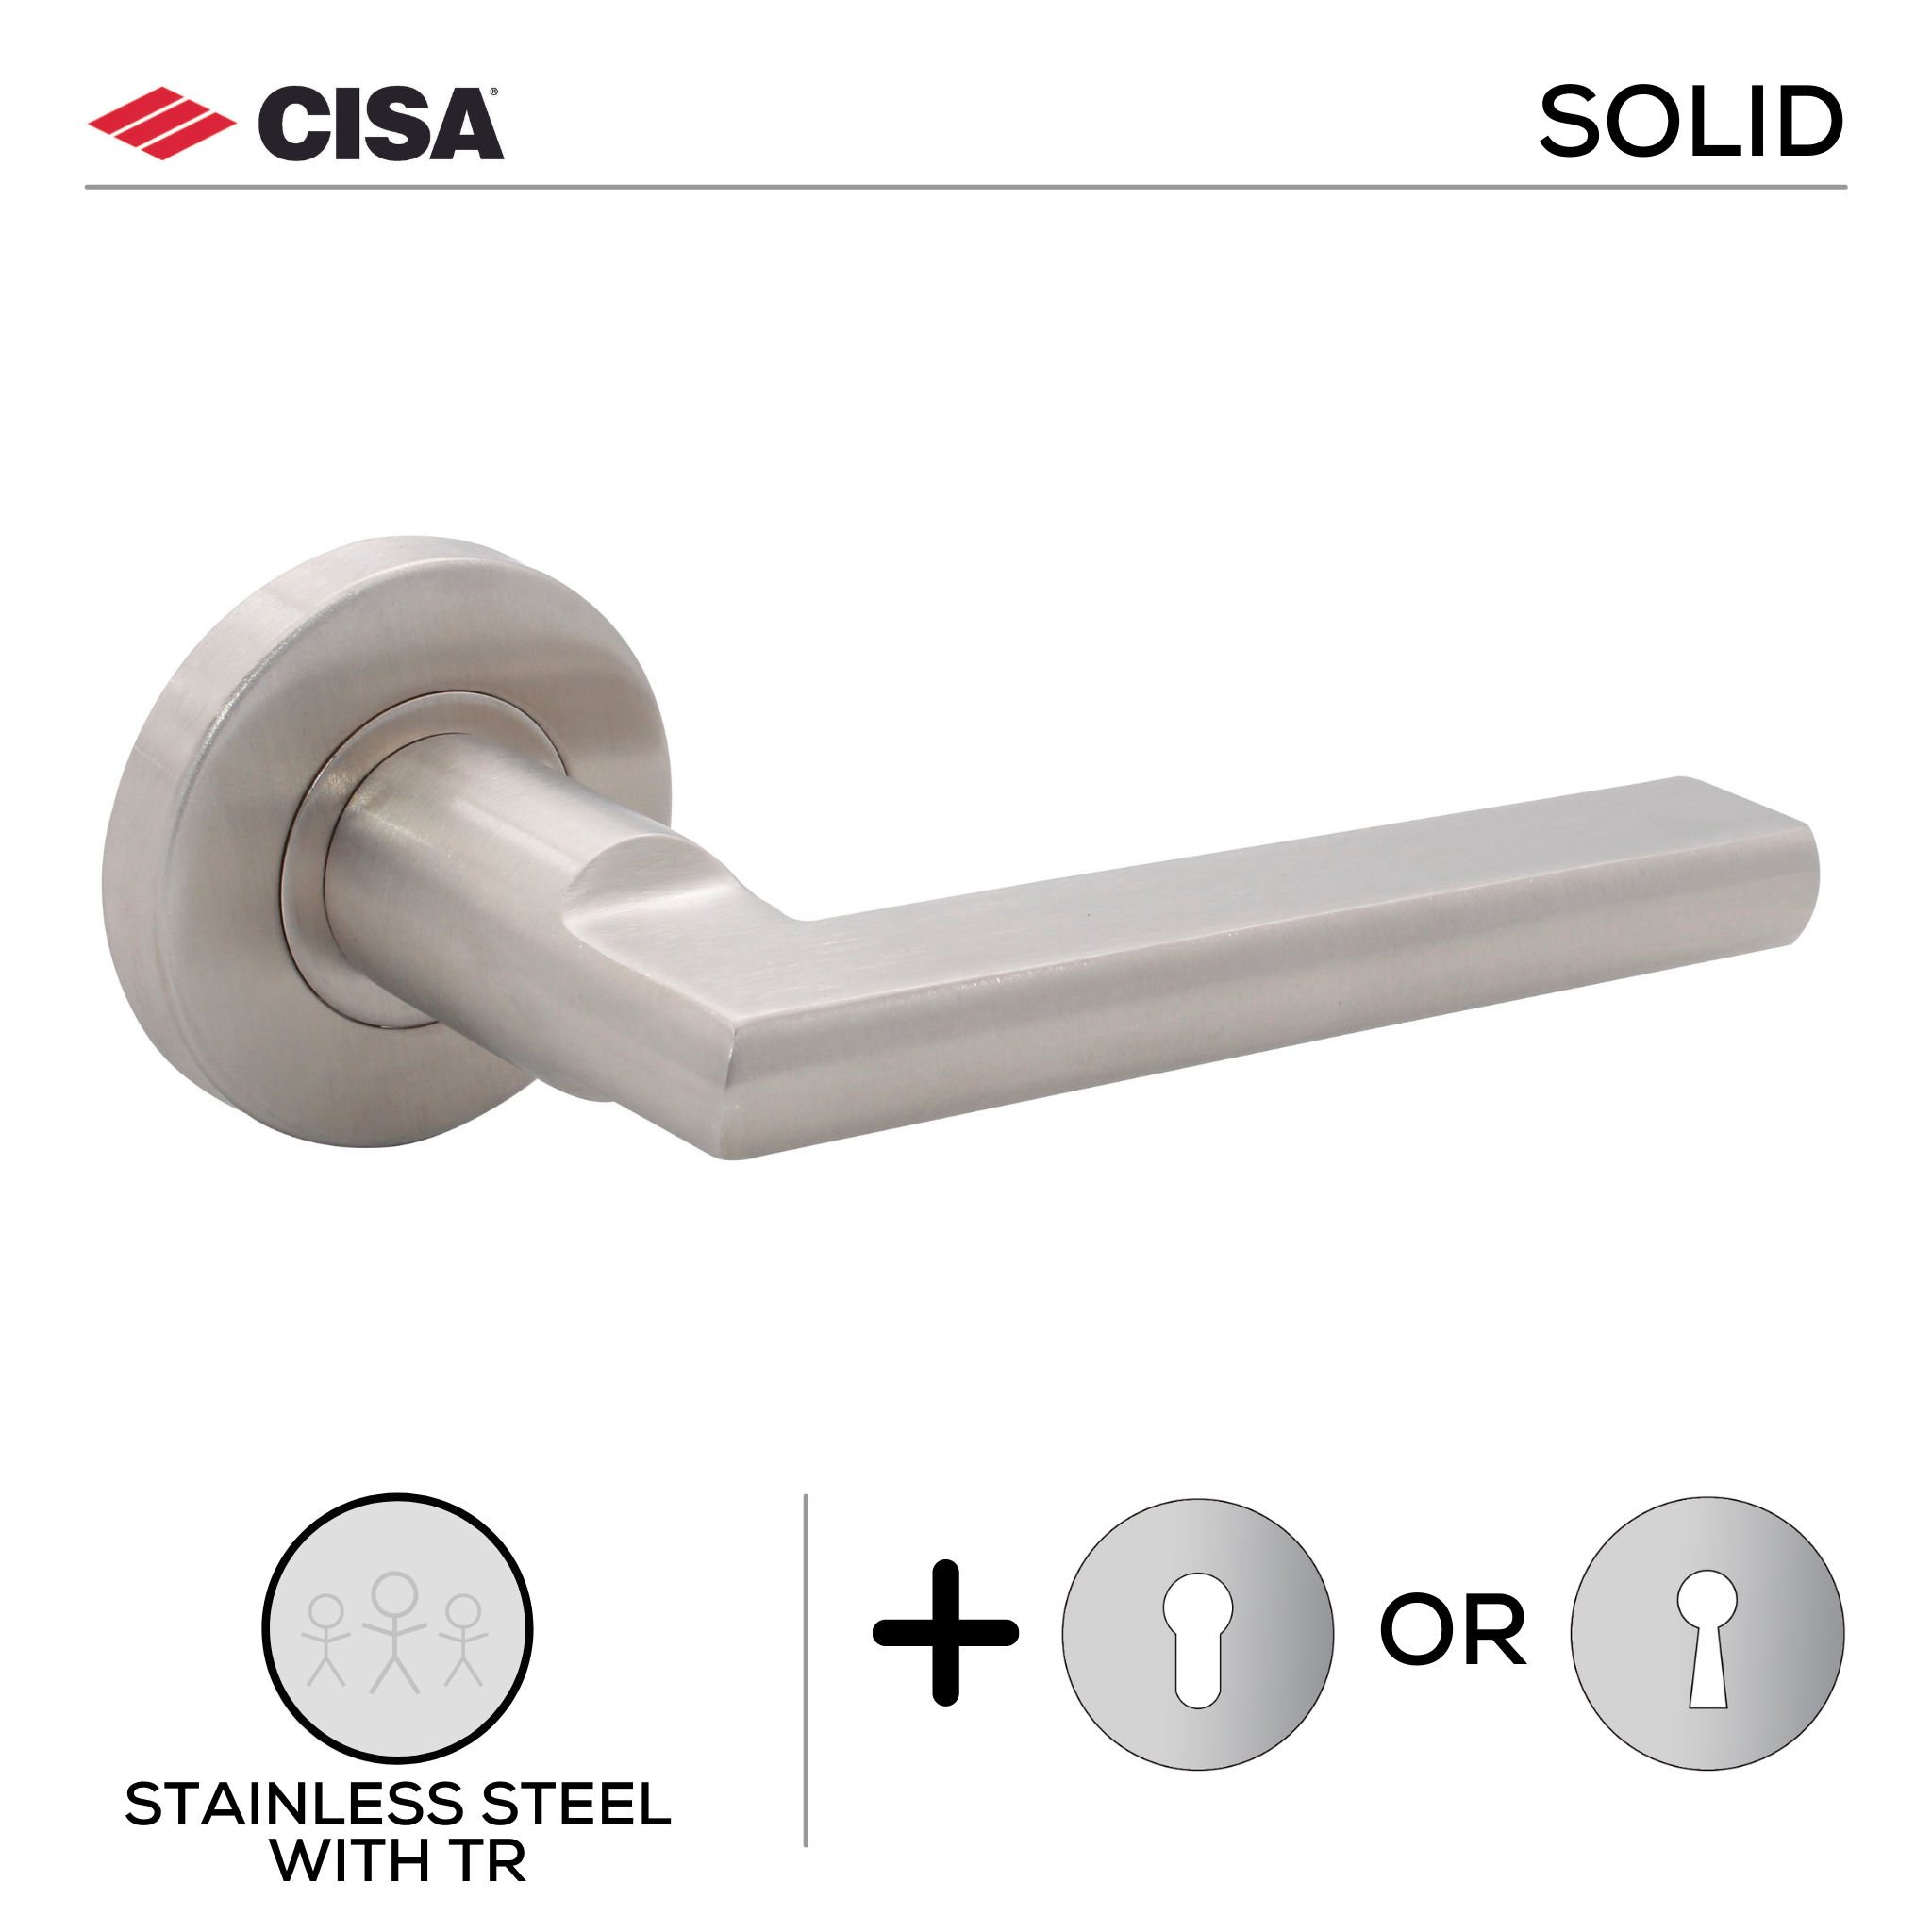 FS103.R._.TR, Lever Handles, Solid, On Round Rose, With Escutcheons, 134mm (l), Stainless Steel with Tarnish Resistant, CISA